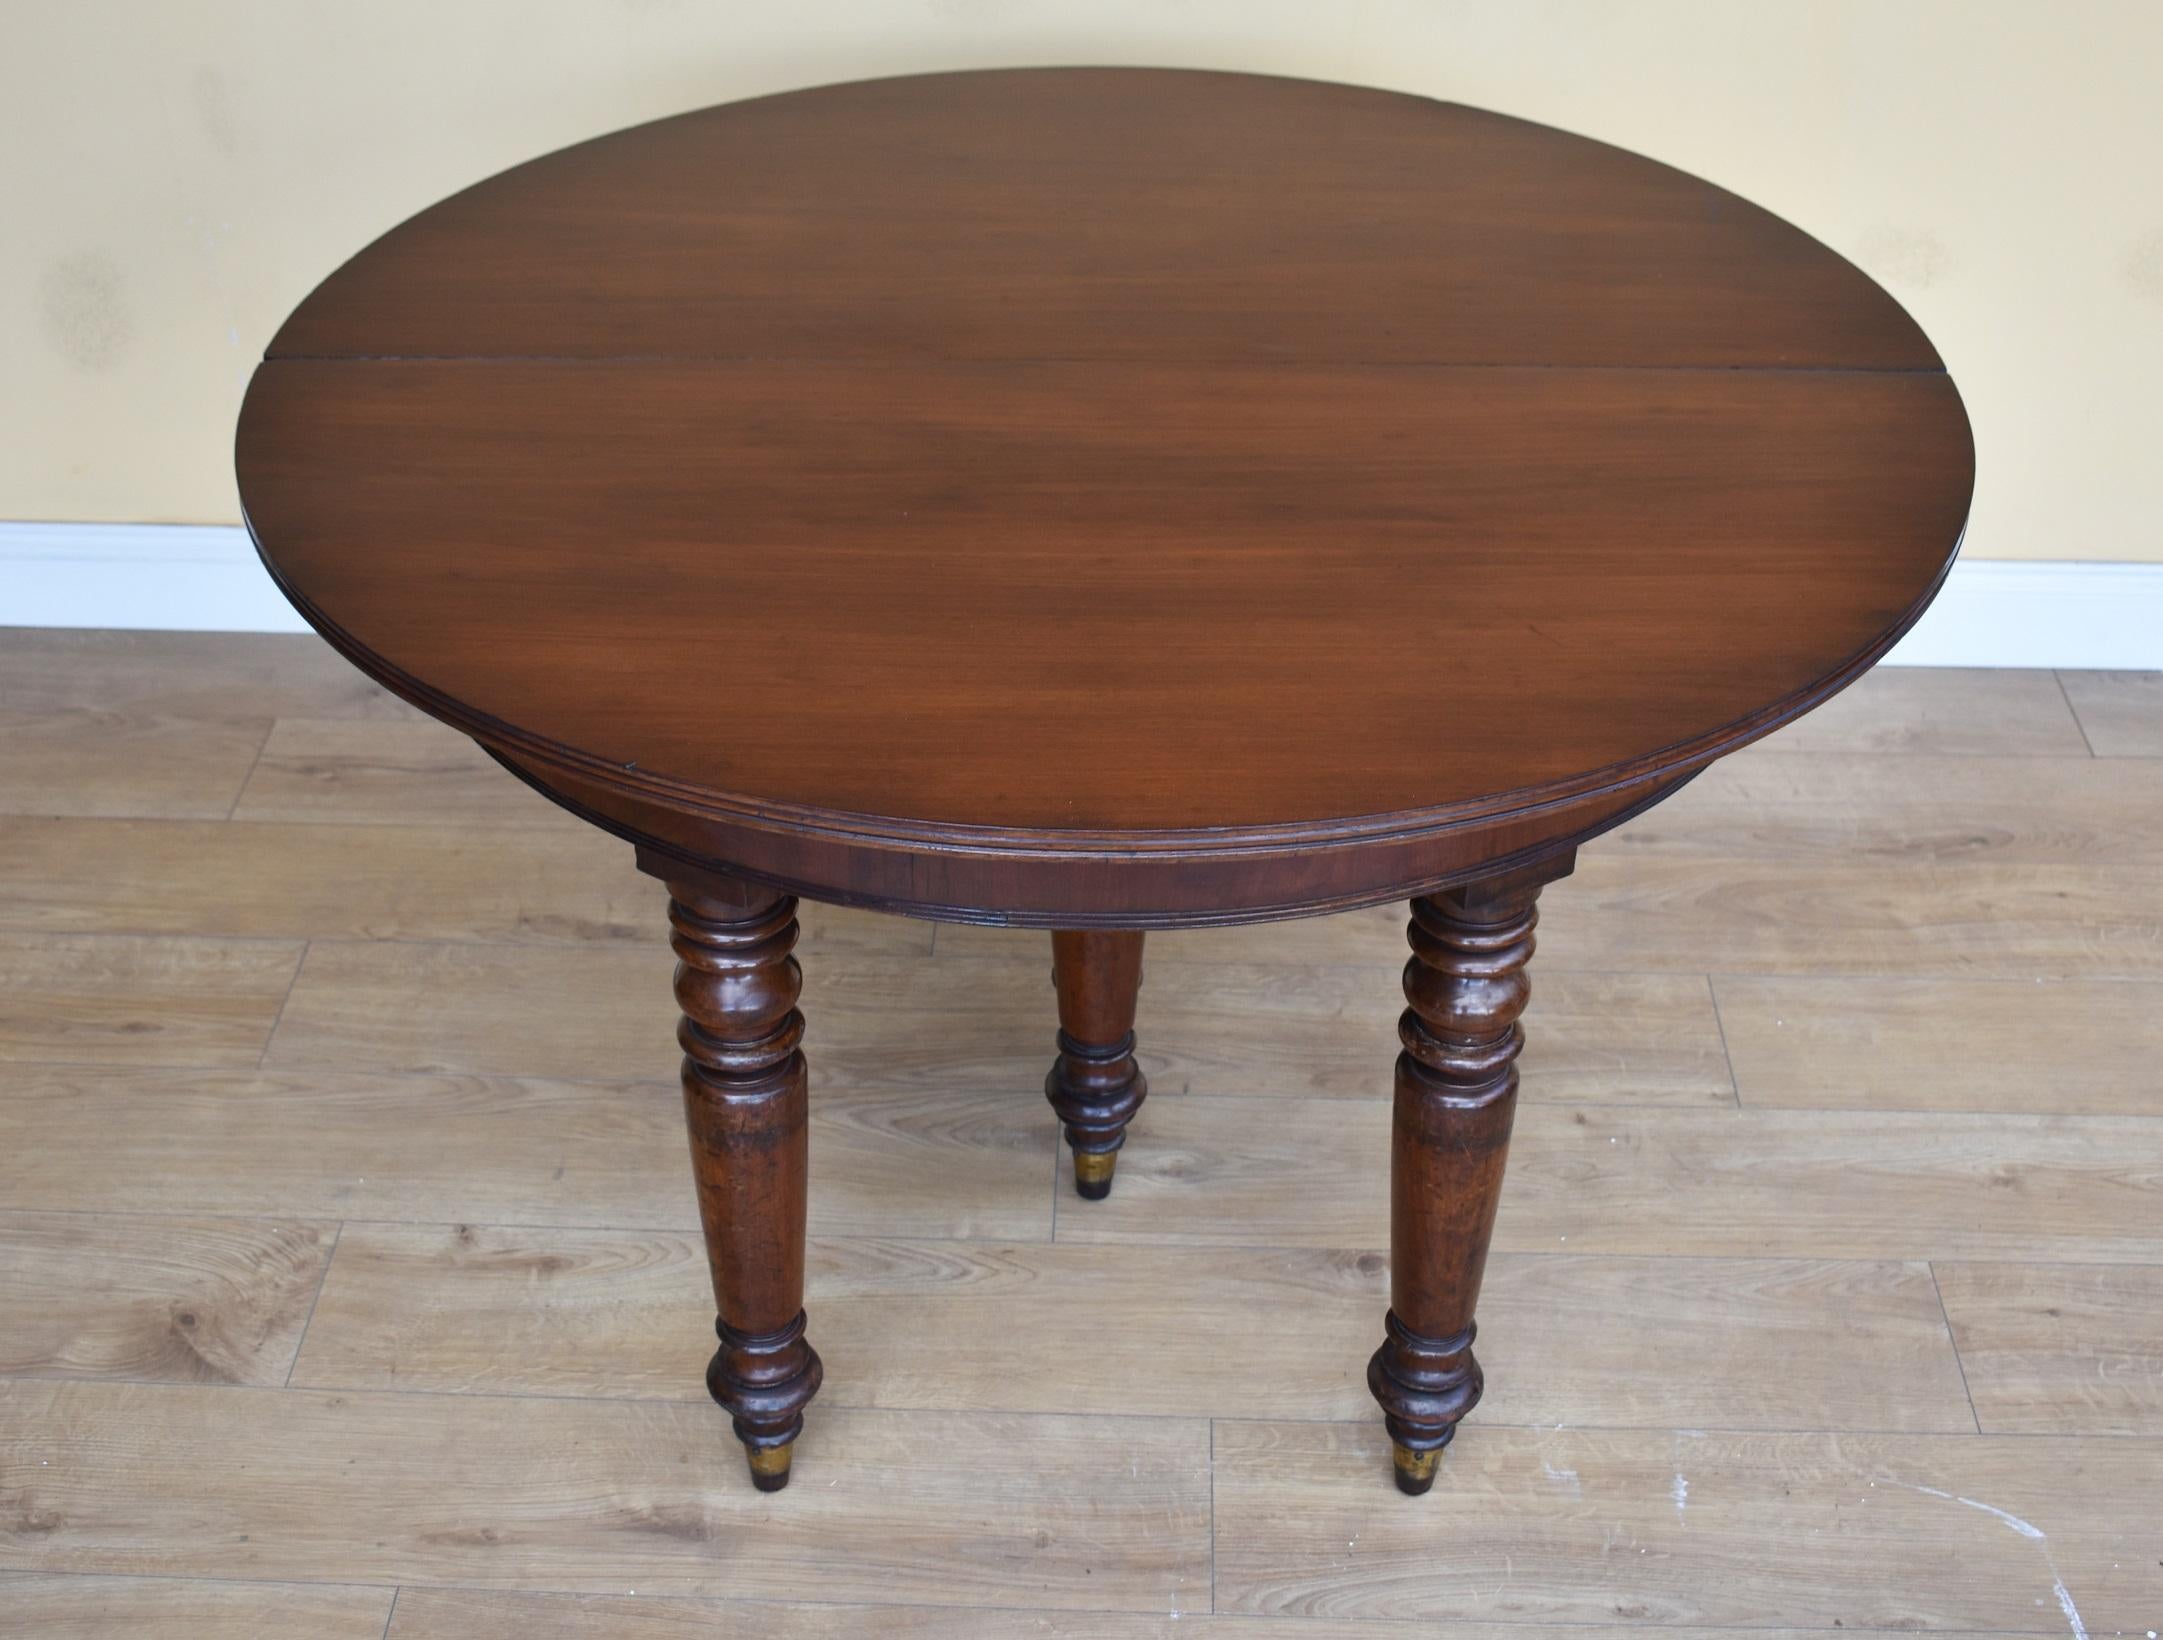 19th Century English William IV Mahogany Dining Table In Excellent Condition For Sale In Chelmsford, Essex